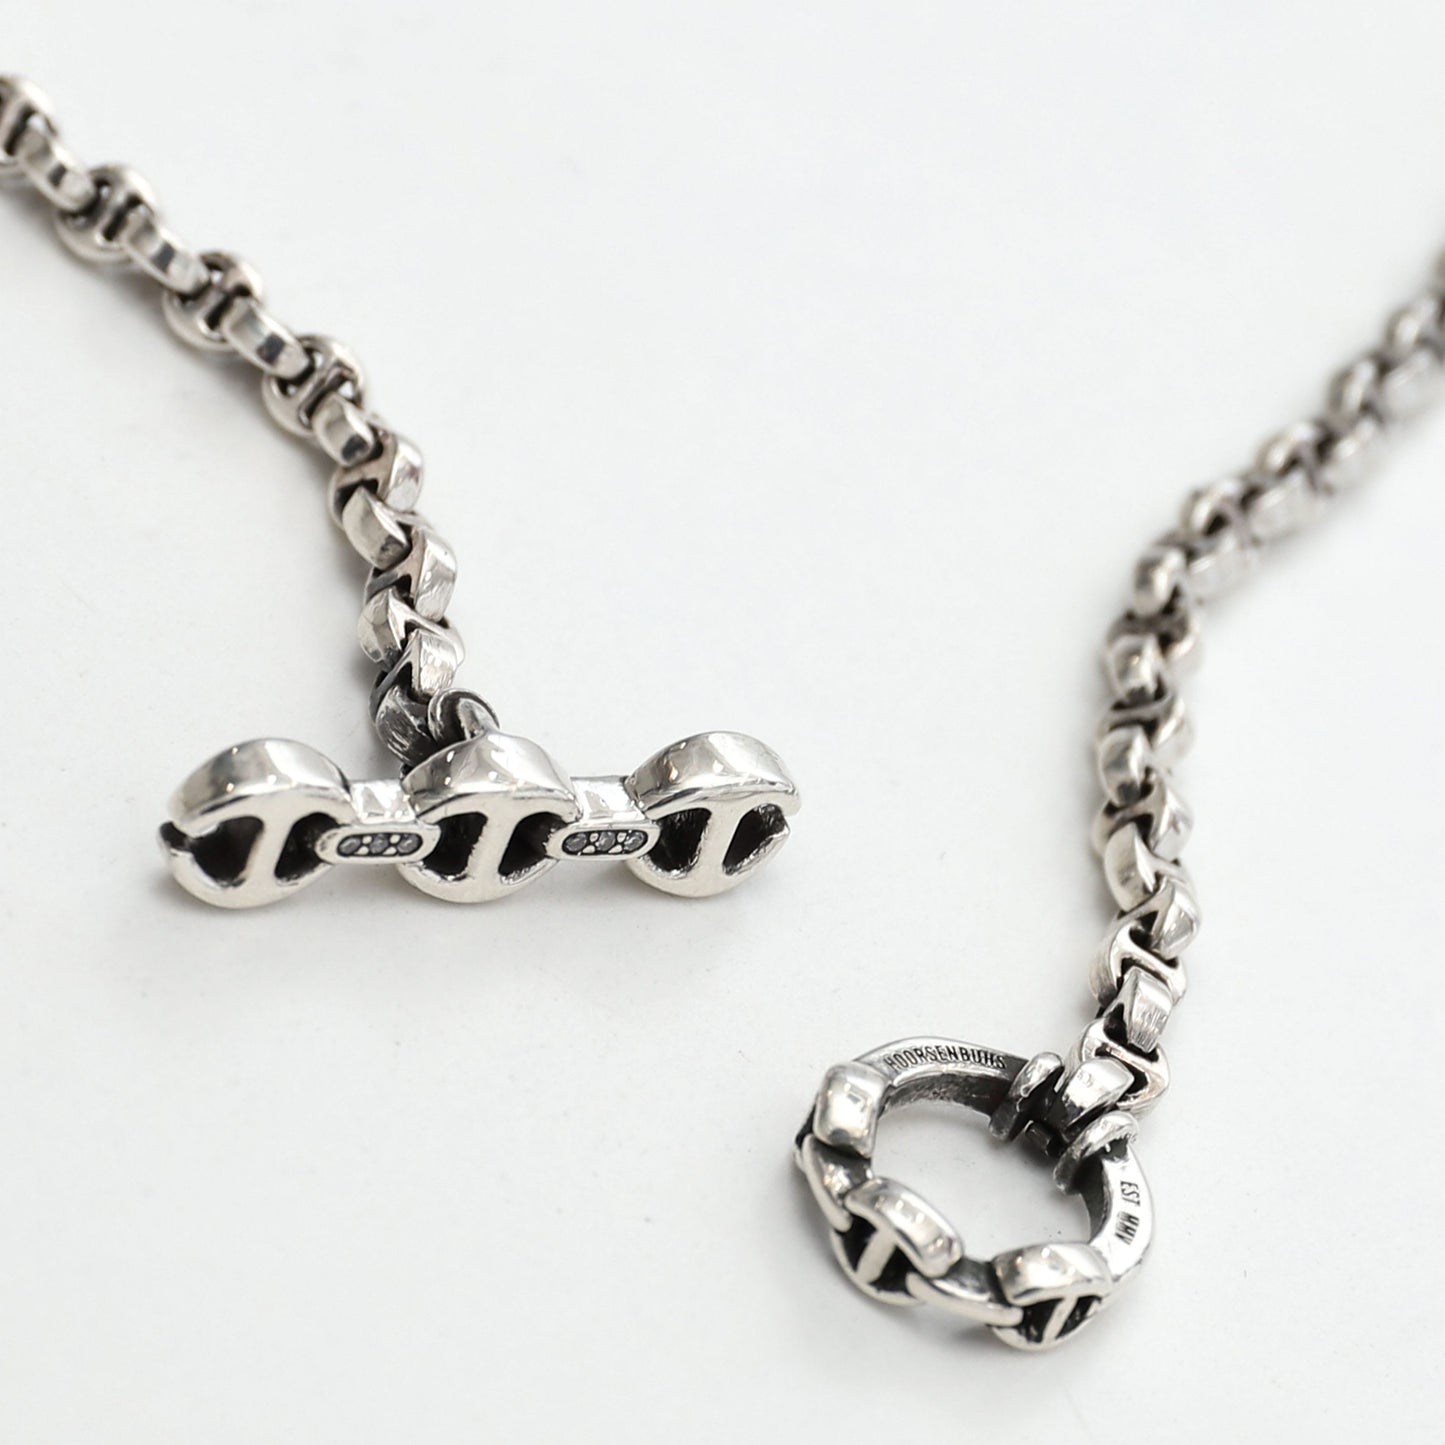 20inc MICRO OPEN-LINK NECKLACE  HB040